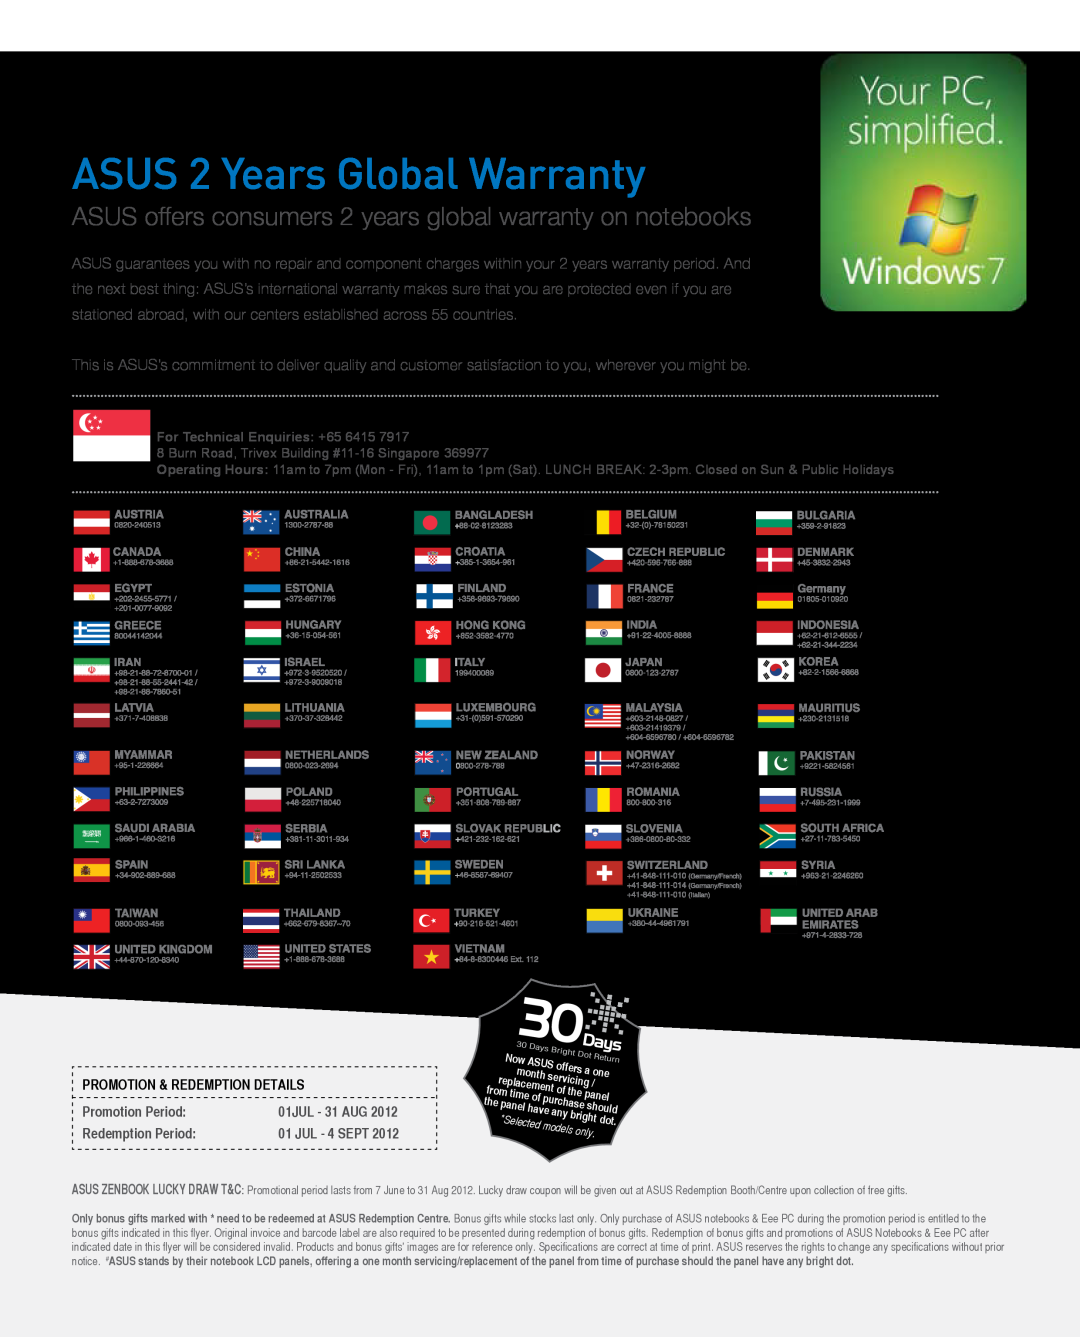 Asus N55SLDS71 ASUS 2 Years Global Warranty, ASUS offers consumers 2 years global warranty on notebooks, Promotion Period 